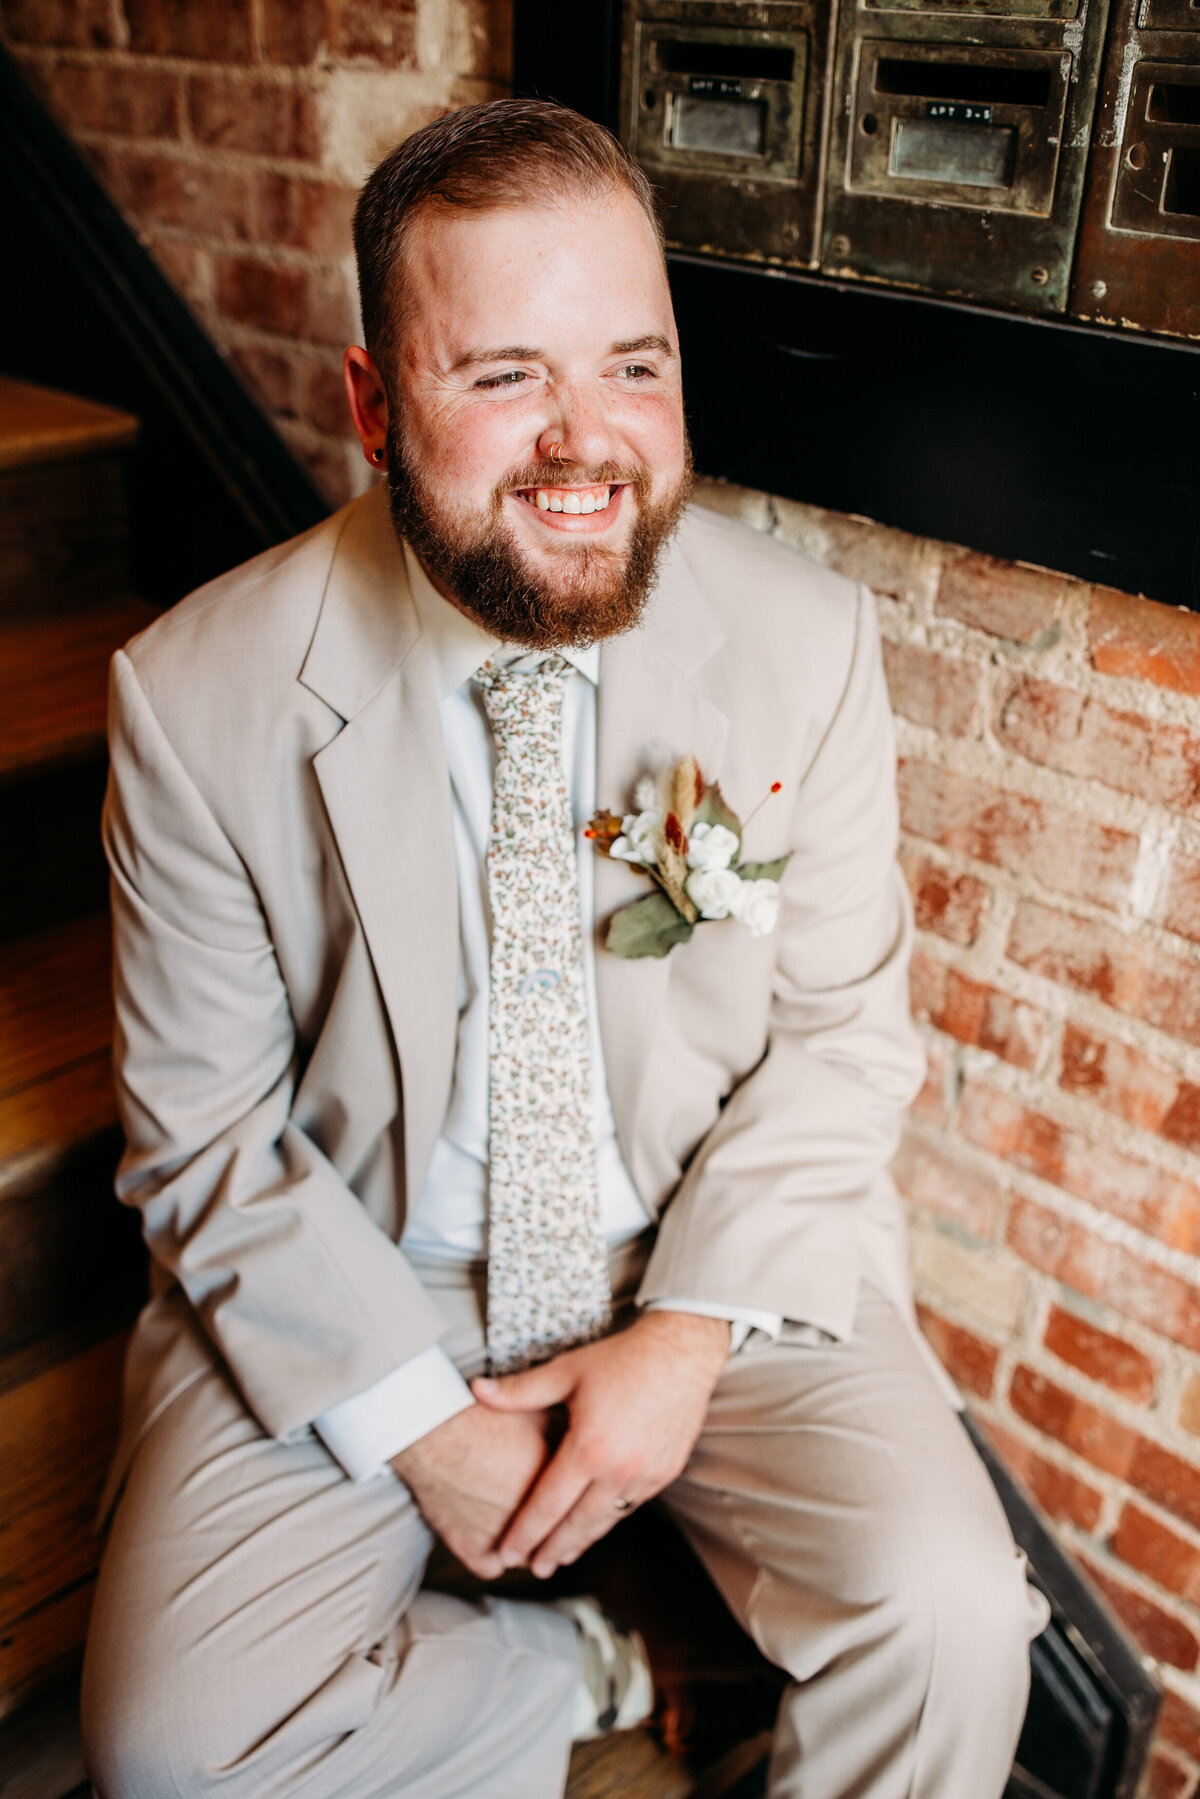 Groom seated and smiling broadly against a brick wall, wearing a beige suit and a floral tie.